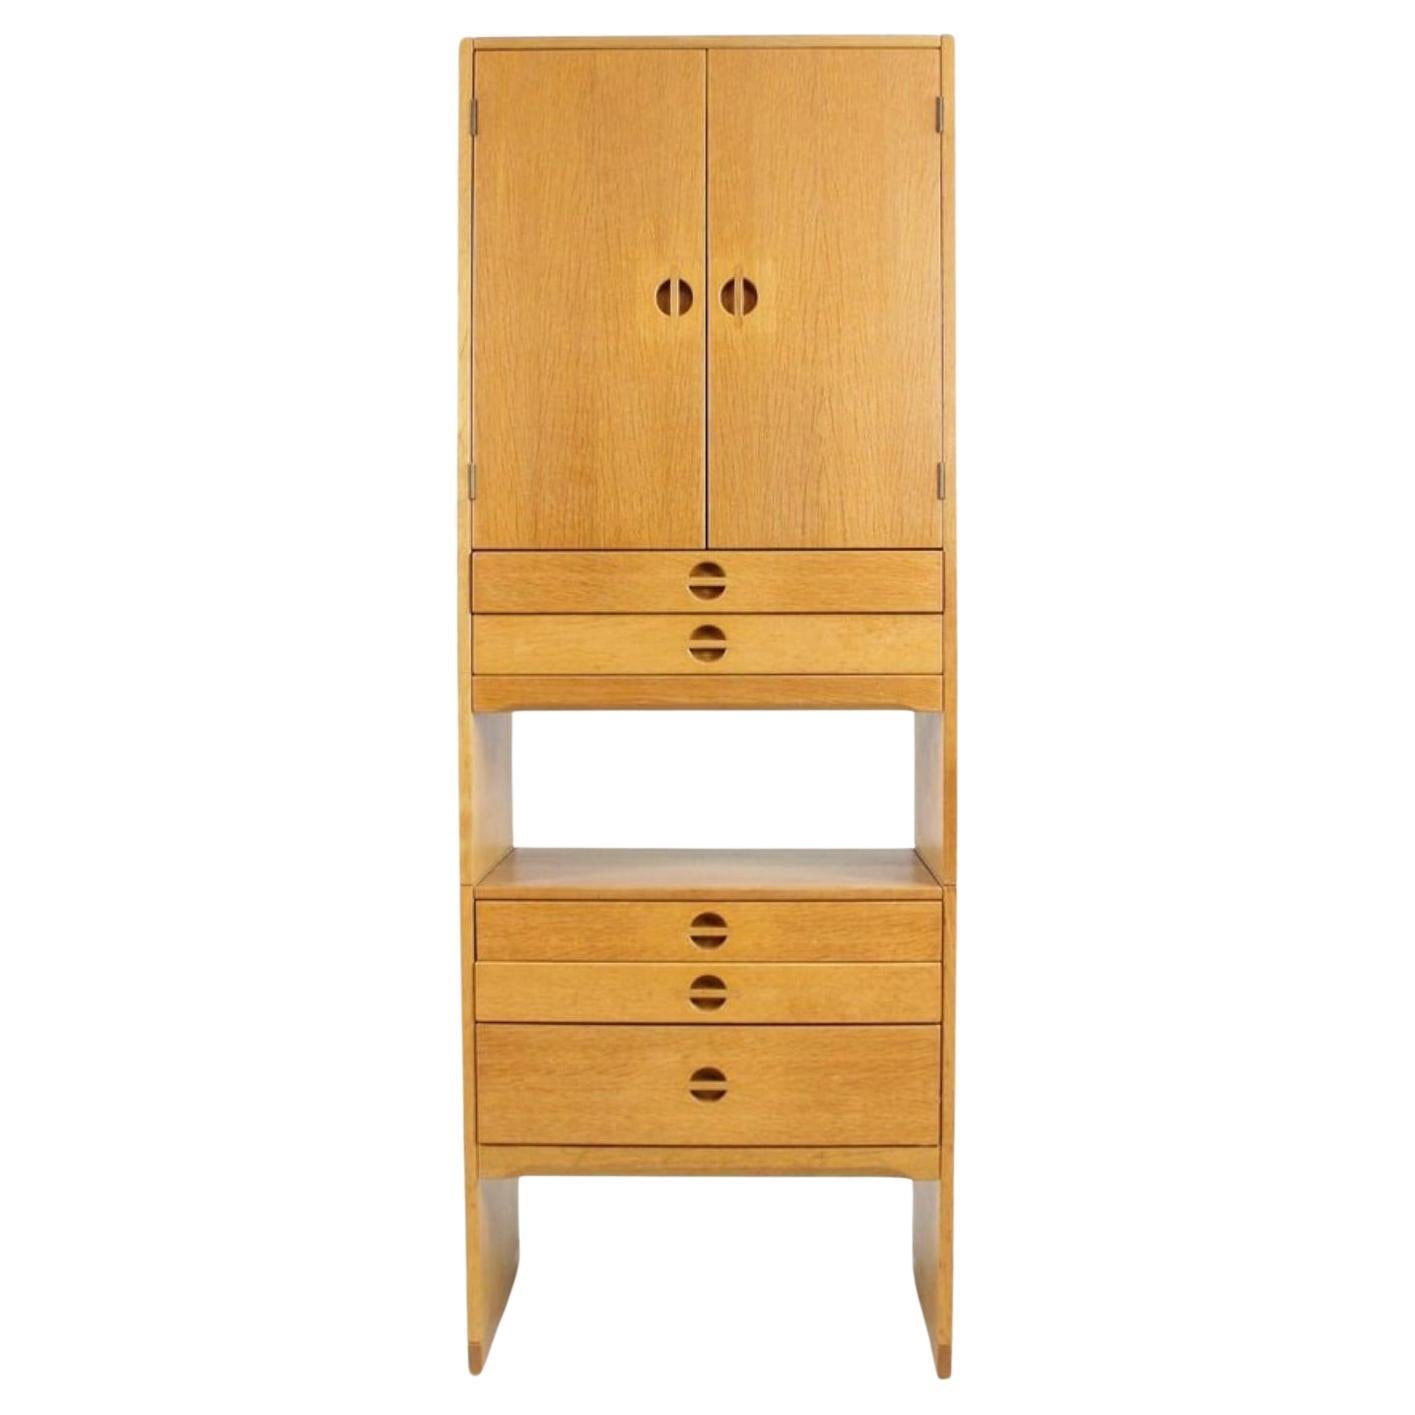 Mid Century Danish Modern Tall Narrow Cabinet with 5 drawers by Aksel Kjersgaard For Sale